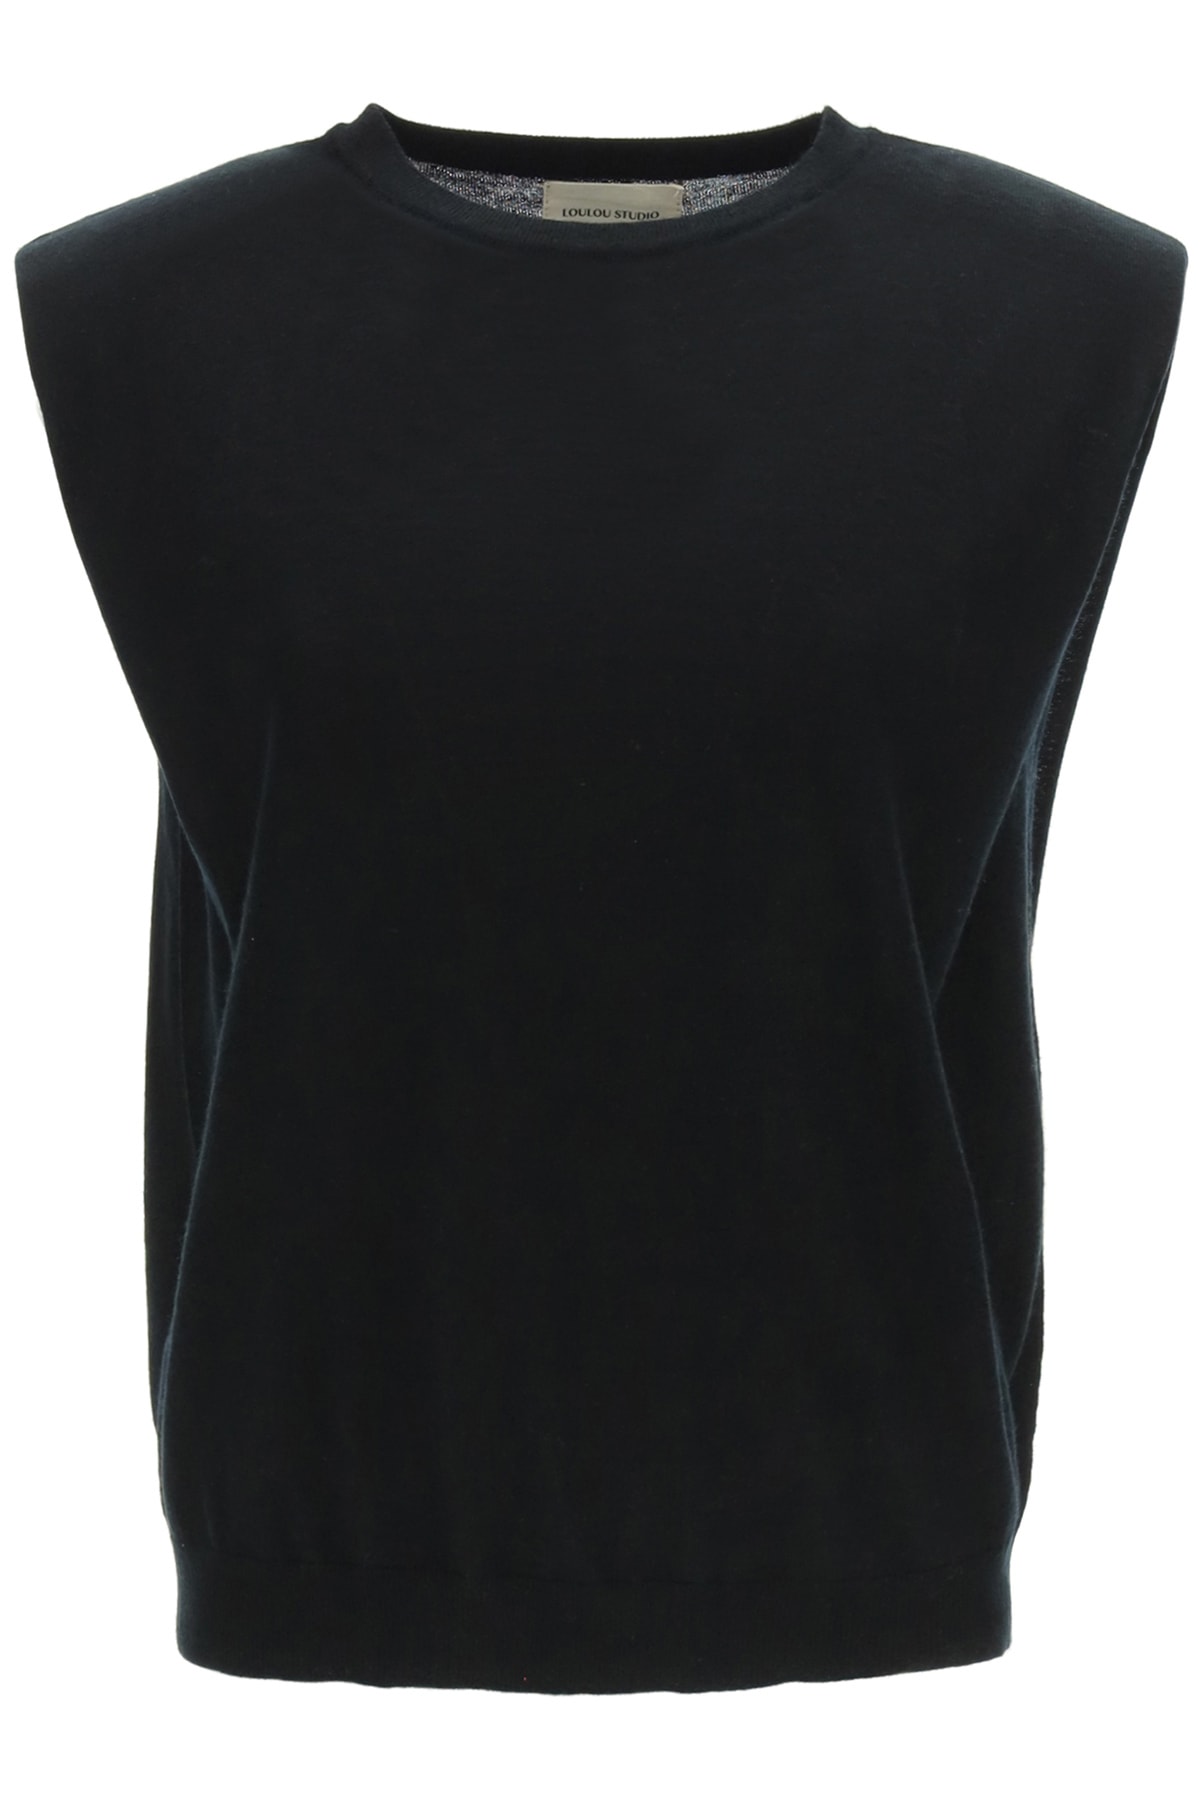 Loulou Studio Cashmere Top With Shoulder Straps